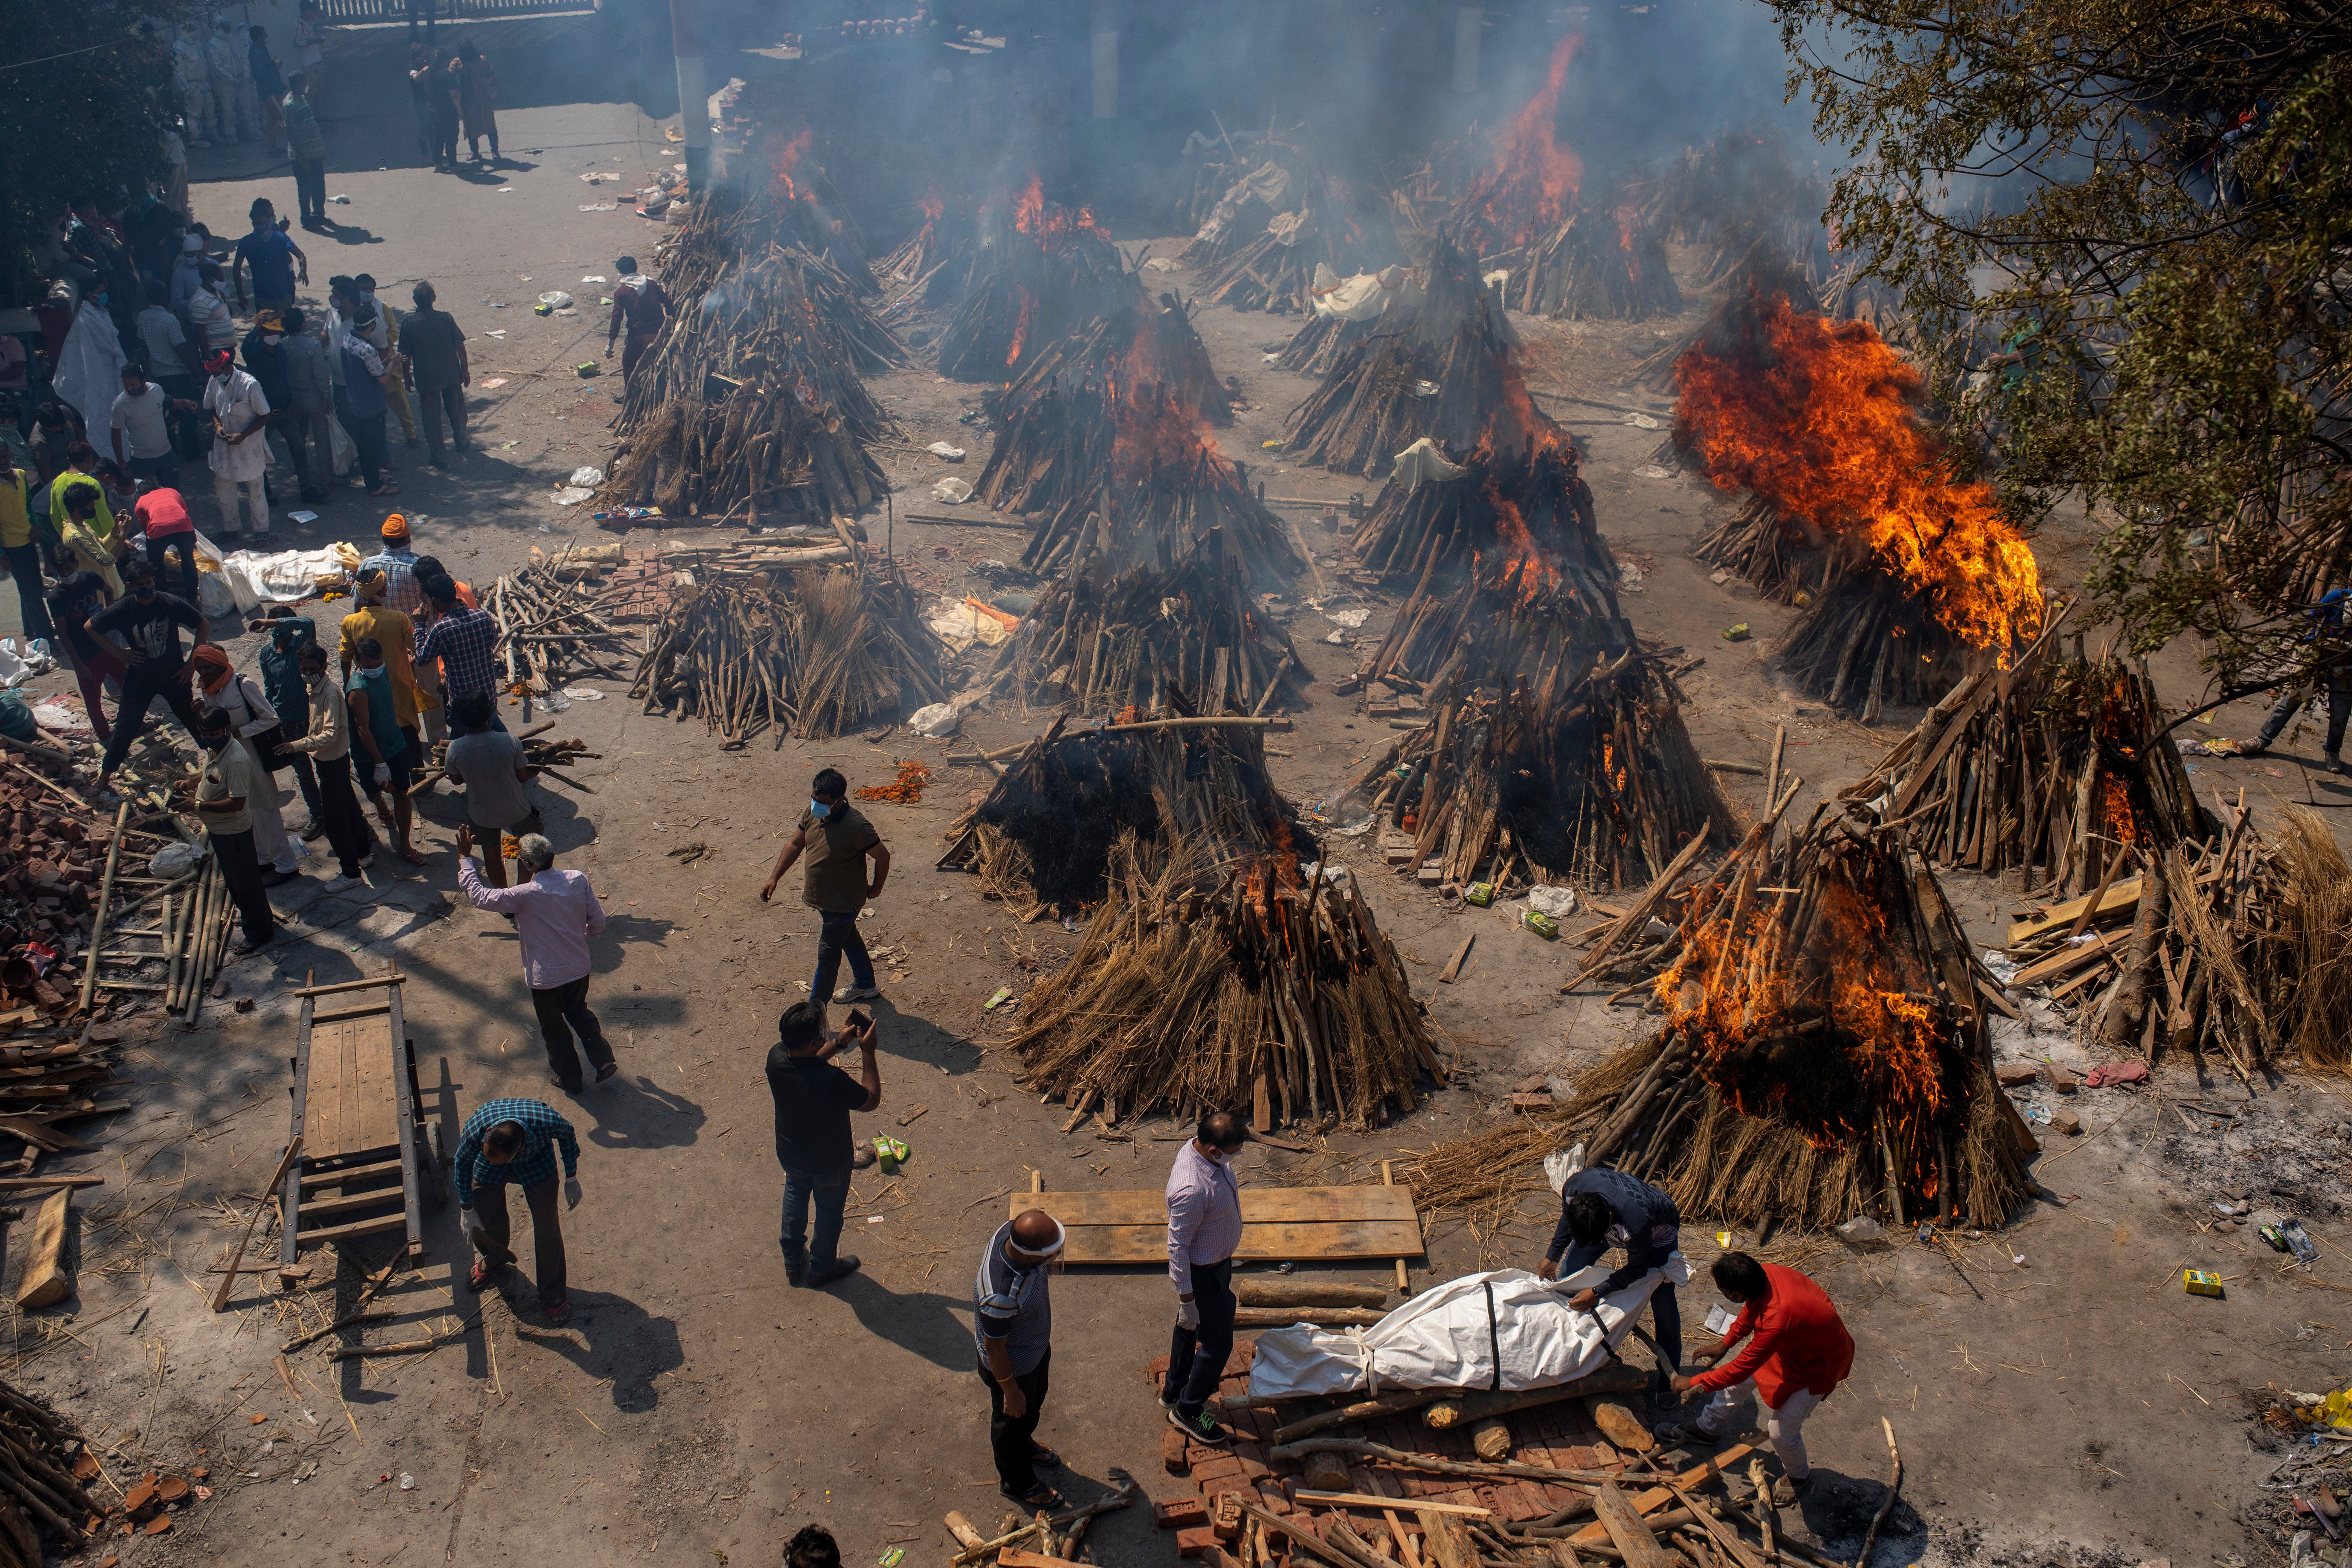 Multiple funeral pyres of victims of COVID-19 burn in an area that has been converted for mass cremation in New Delhi, India, Saturday, April 24, 2021.